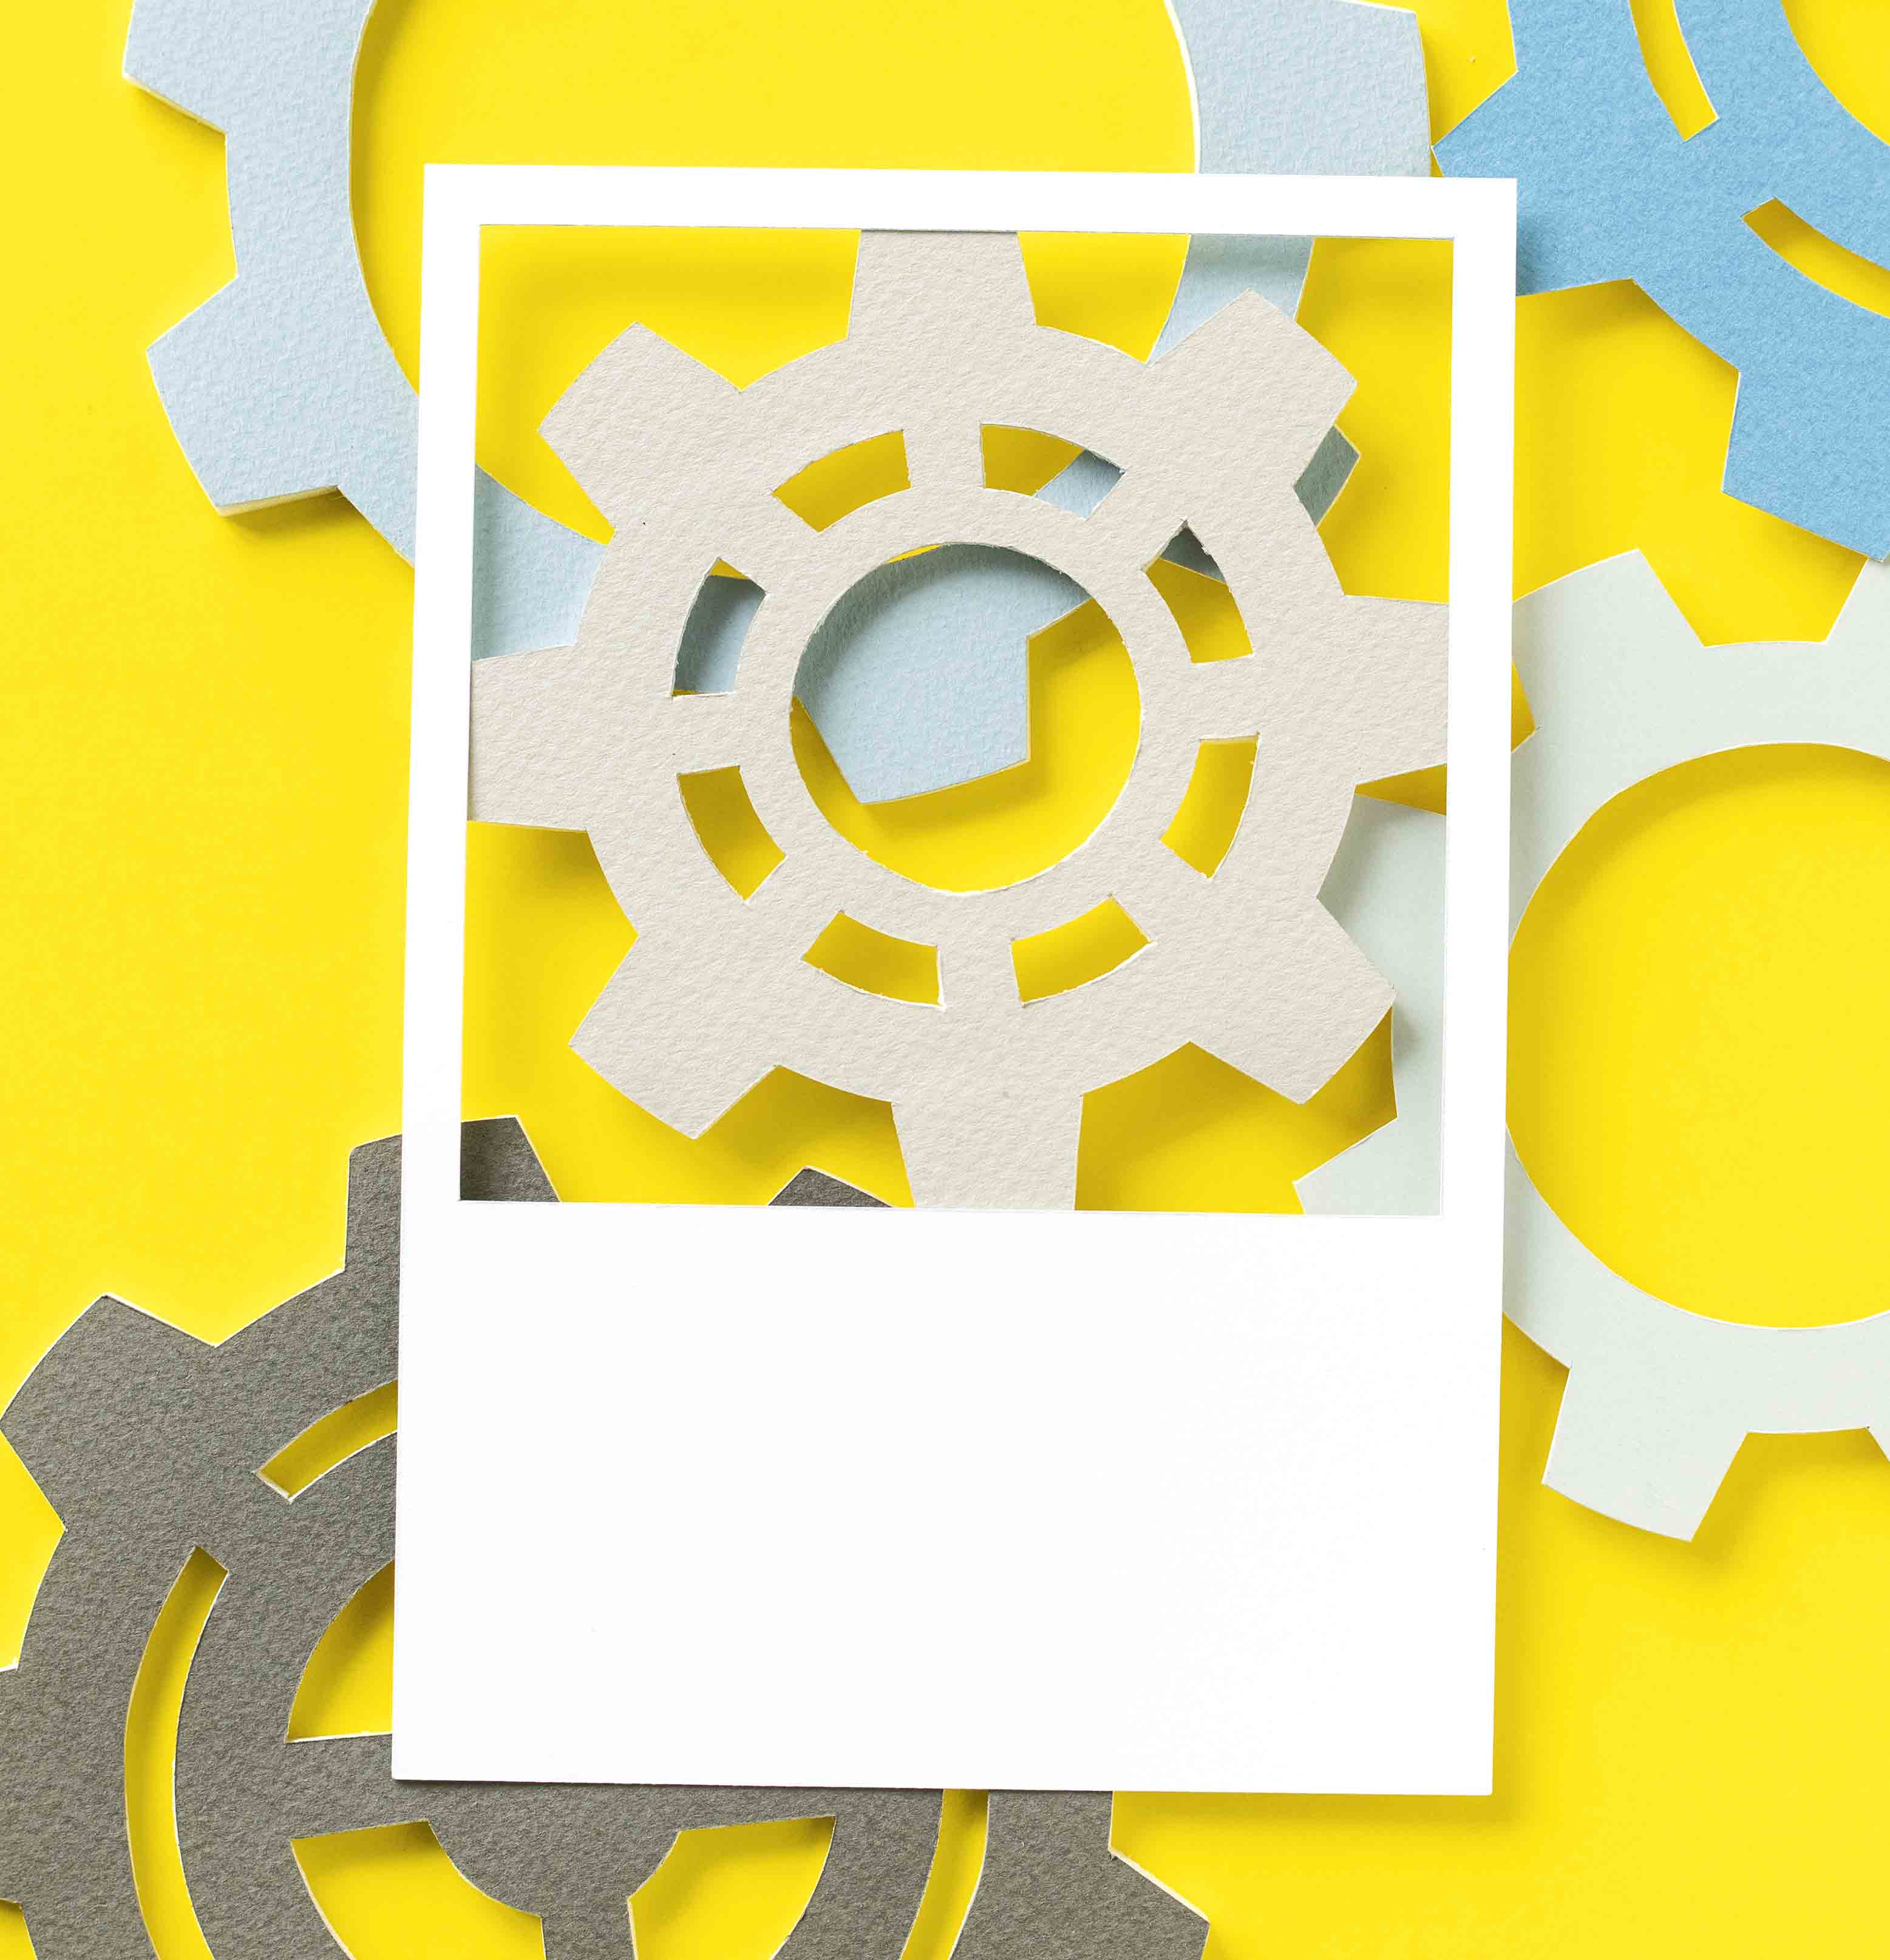 A collection of gears cut out of paper on a yellow background